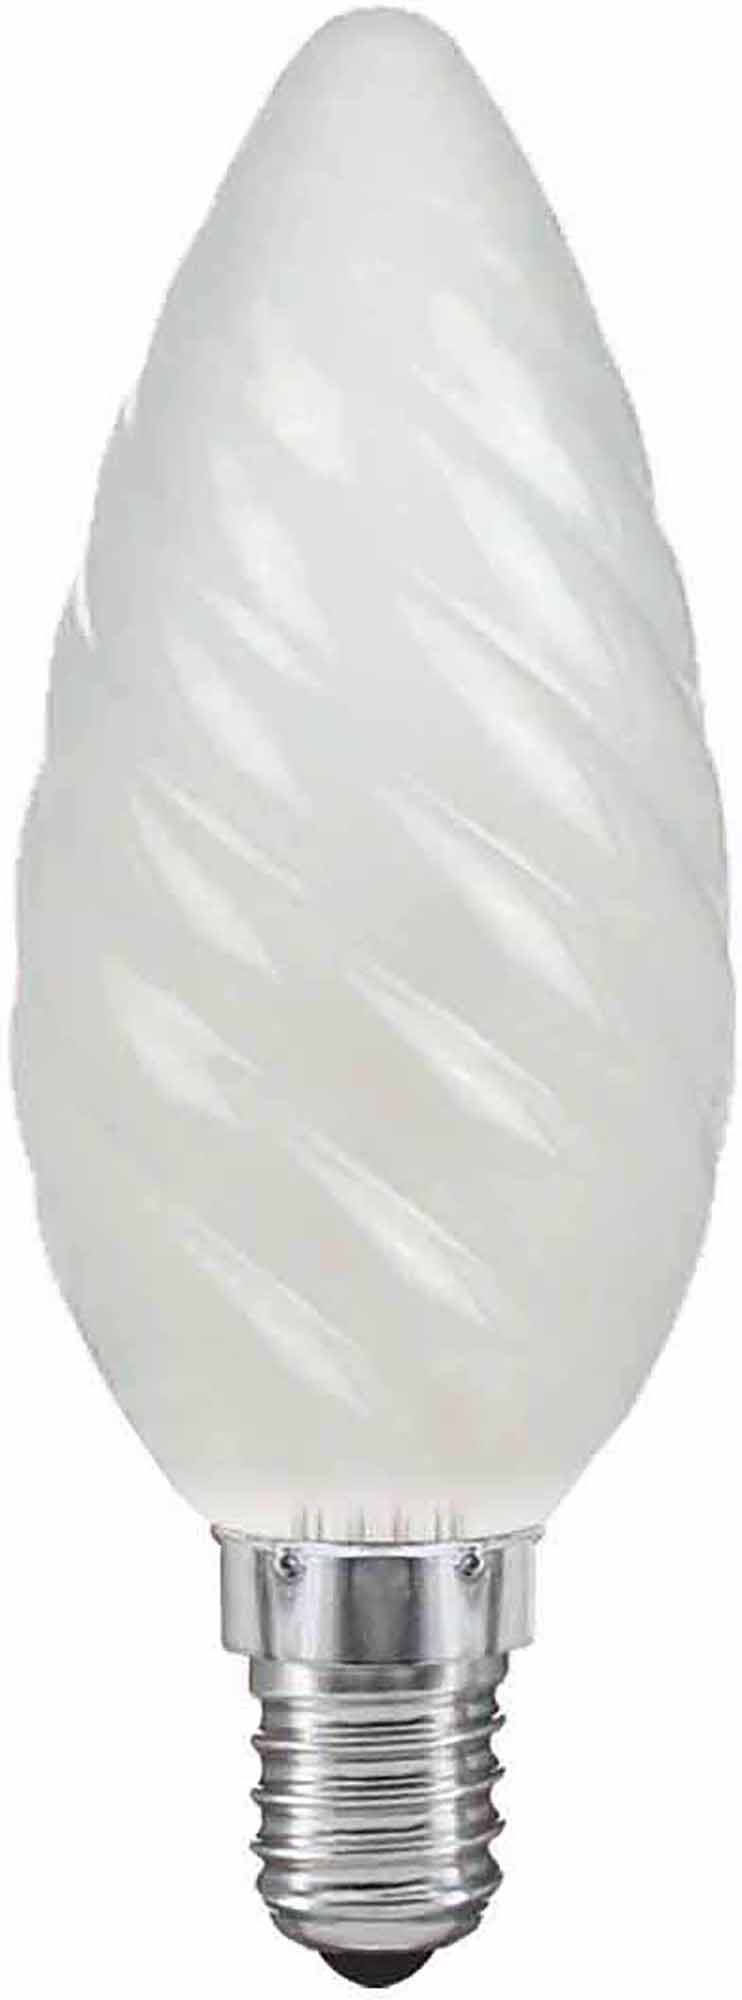 Candle 45mm Twisted Incandescent Luxram Decorative Candle